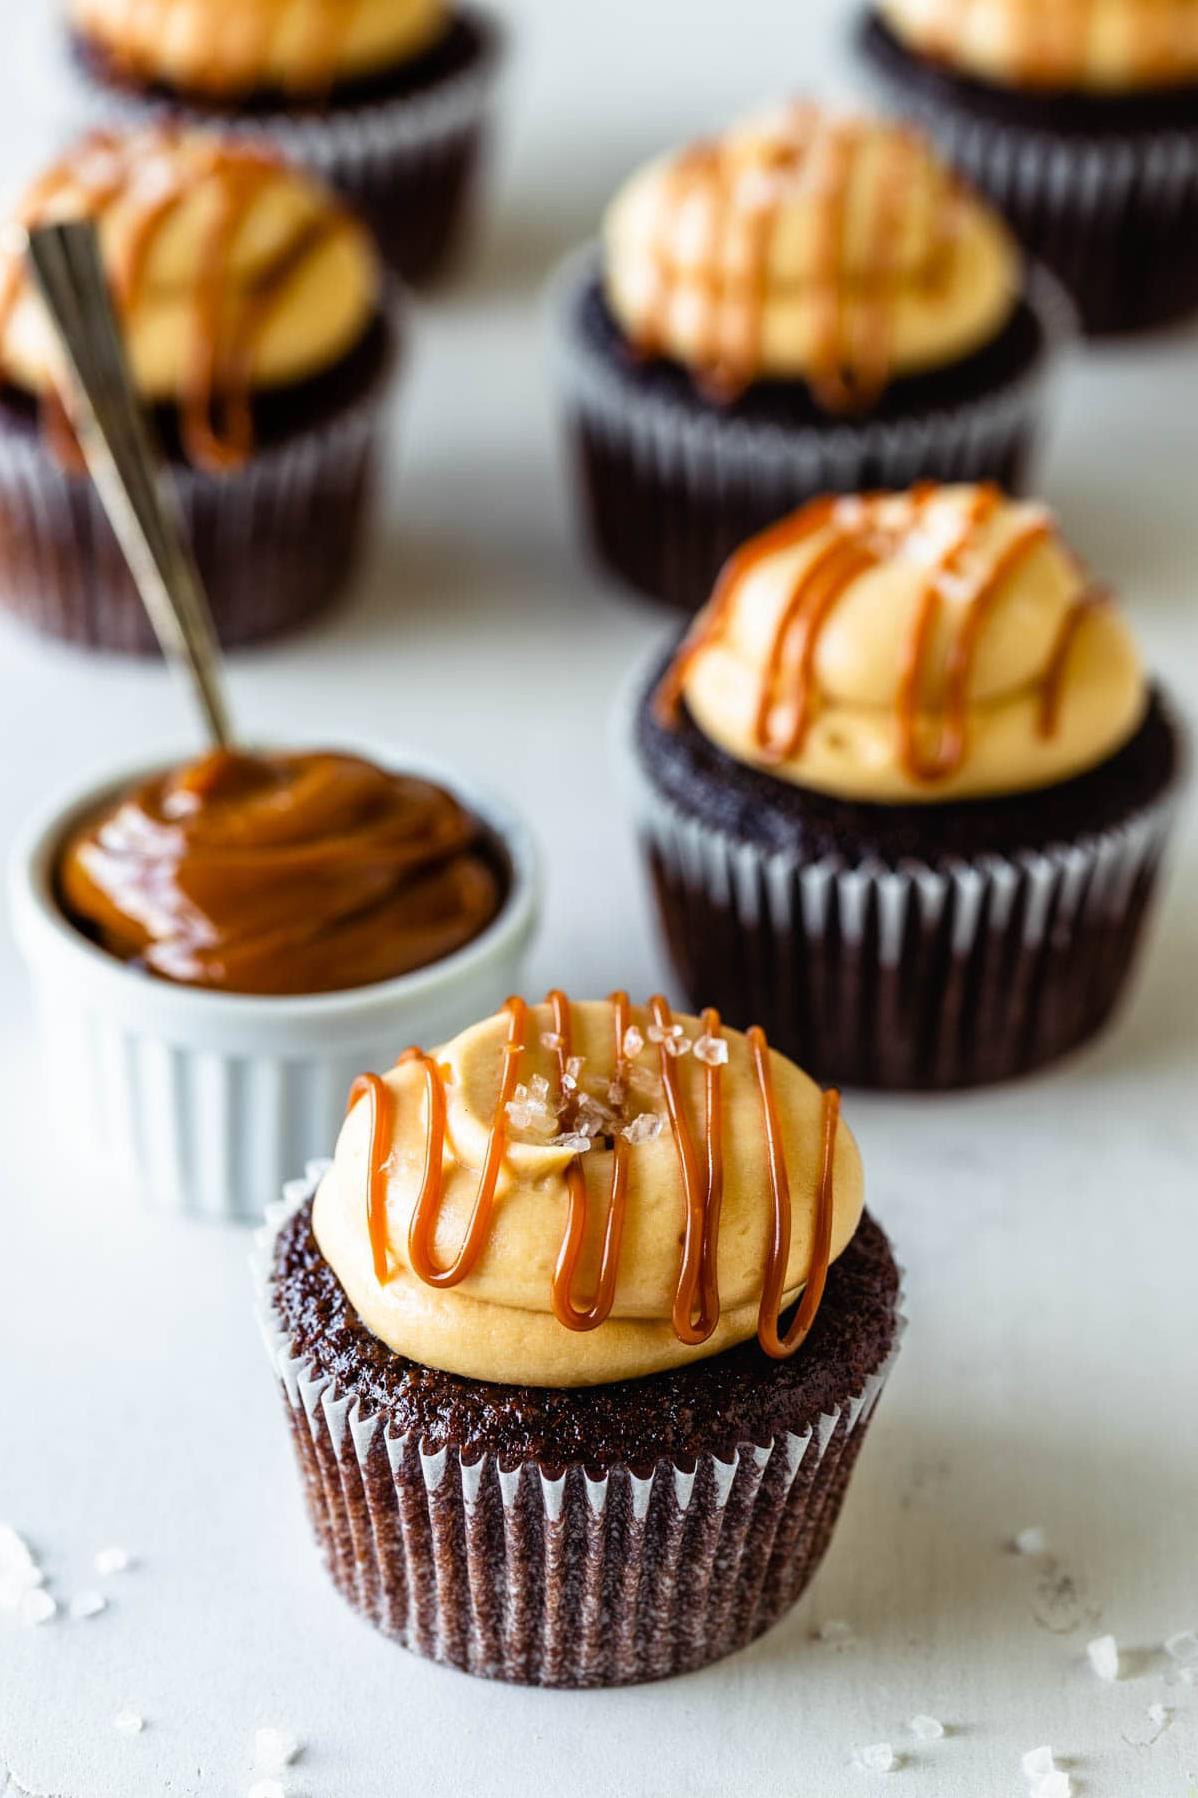  Can't decide between a cupcake or a caramel? Get them both in one bite!